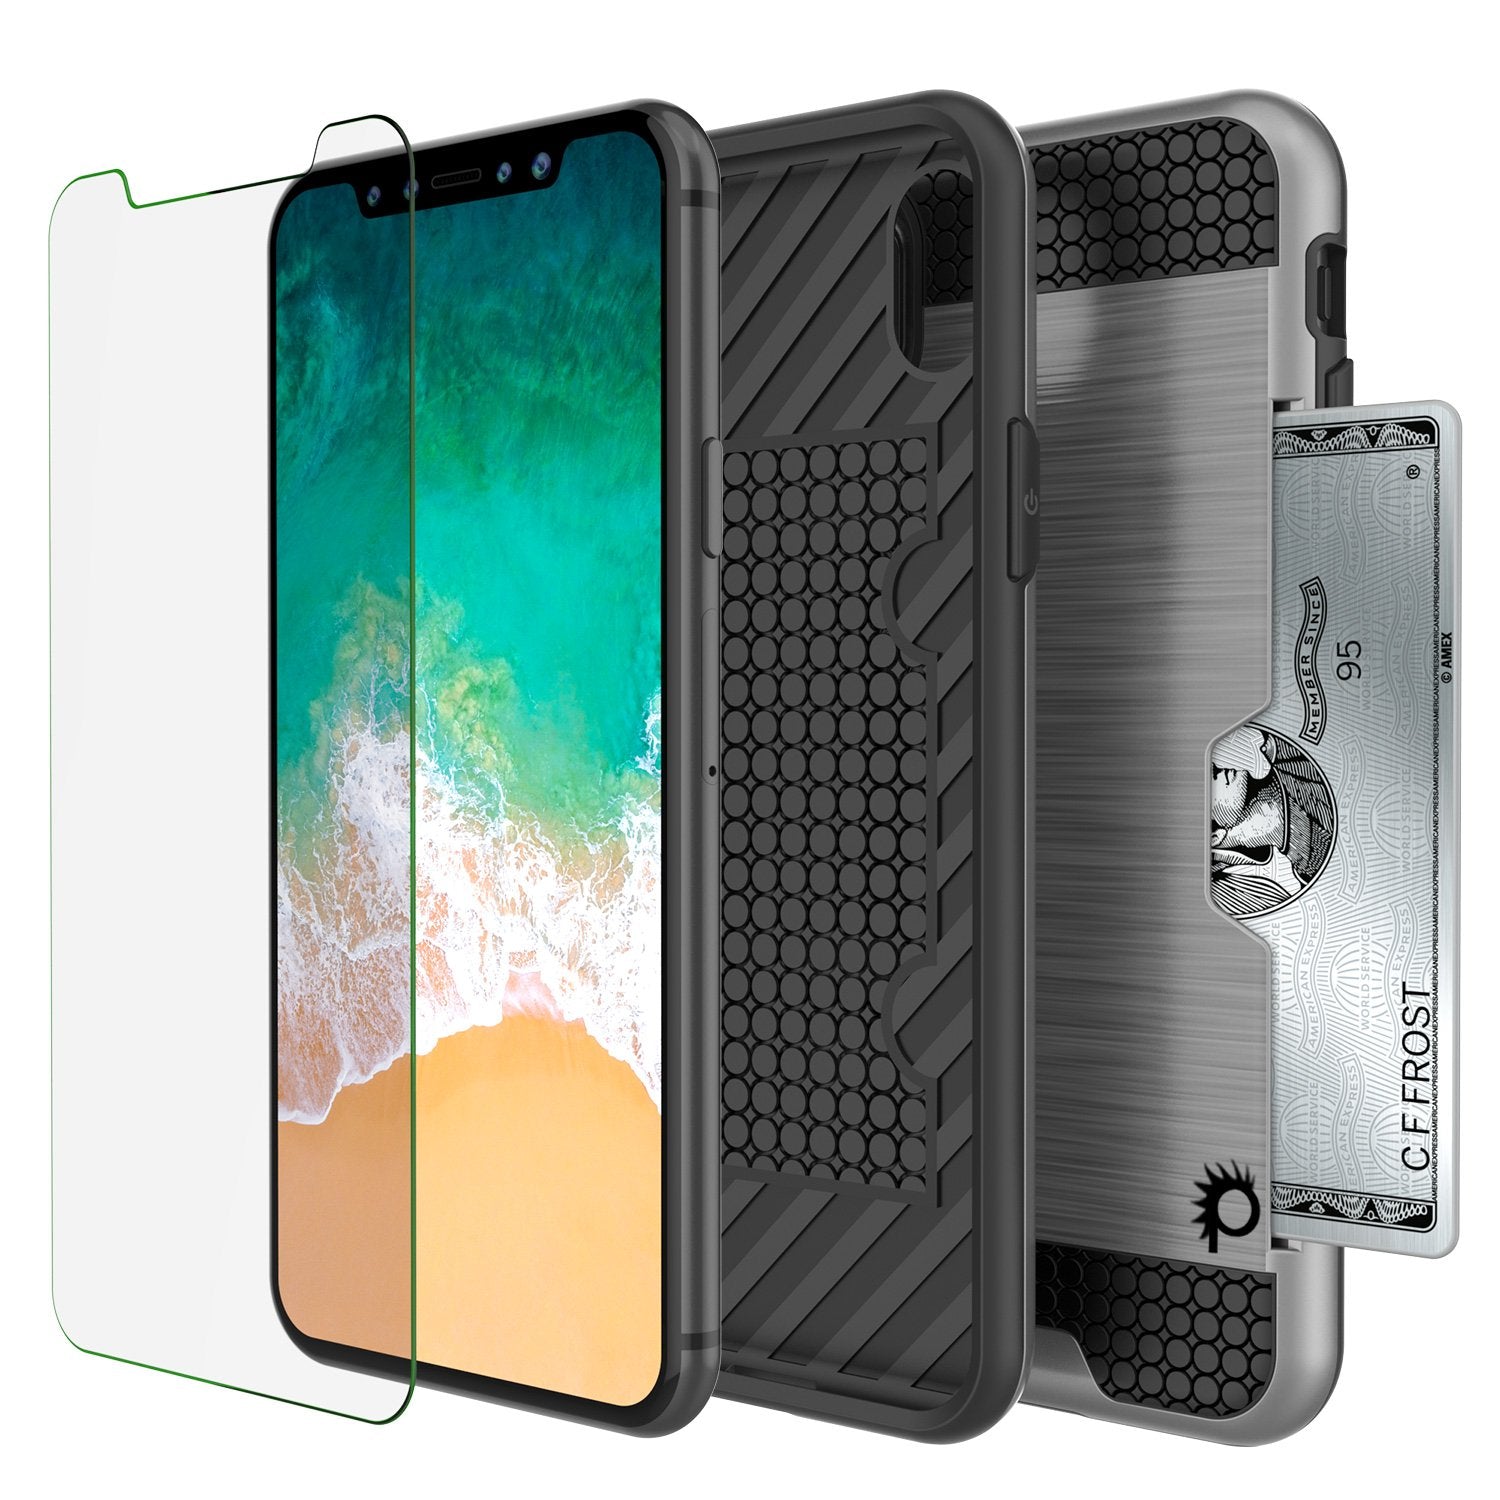 iPhone X Case, PUNKcase [SLOT Series] Slim Fit Dual-Layer Armor Cover & Tempered Glass PUNKSHIELD Screen Protector for Apple iPhone X [Silver]